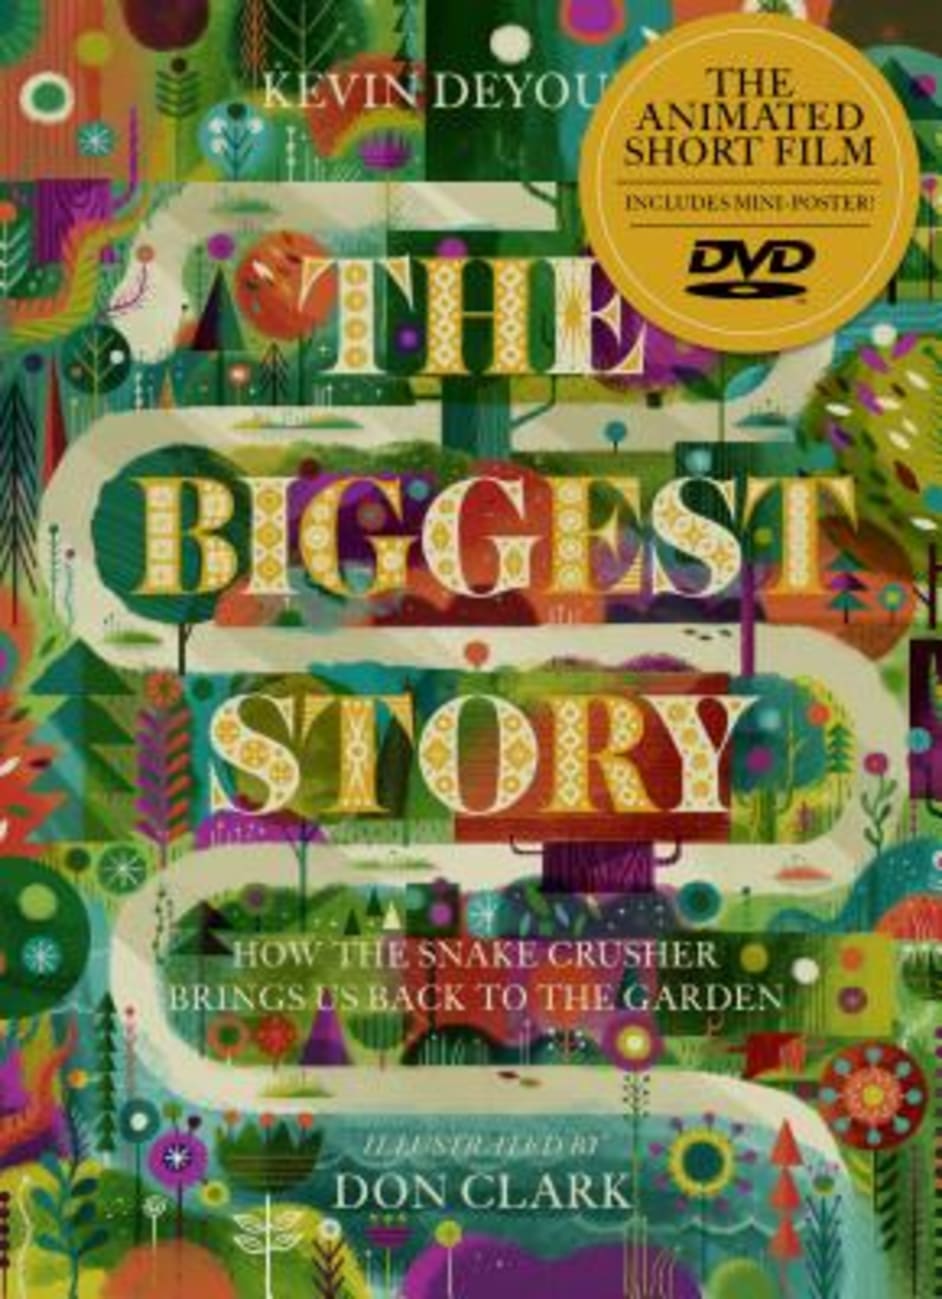 The Biggest Story DVD